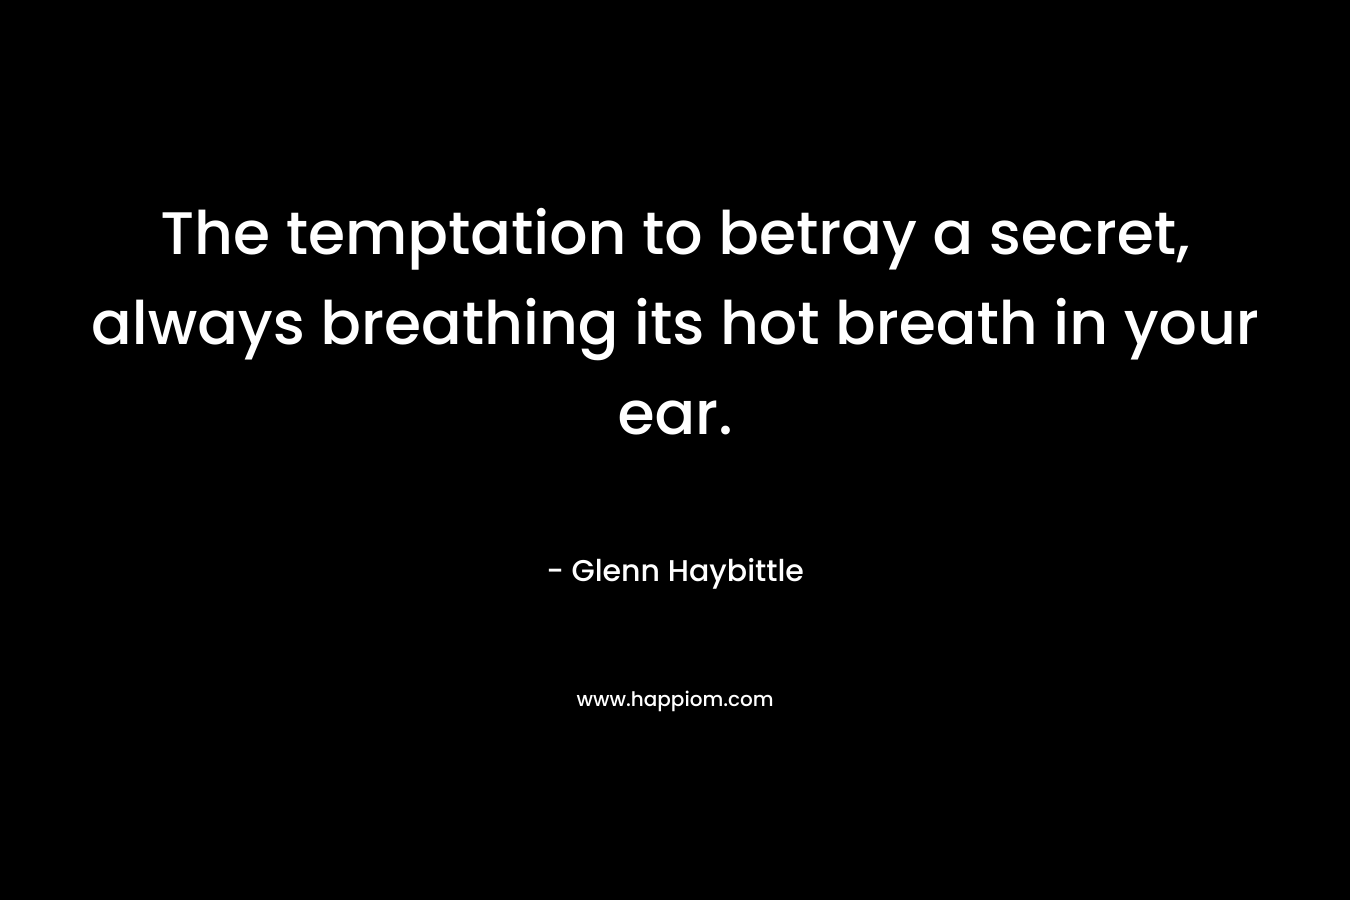 The temptation to betray a secret, always breathing its hot breath in your ear.